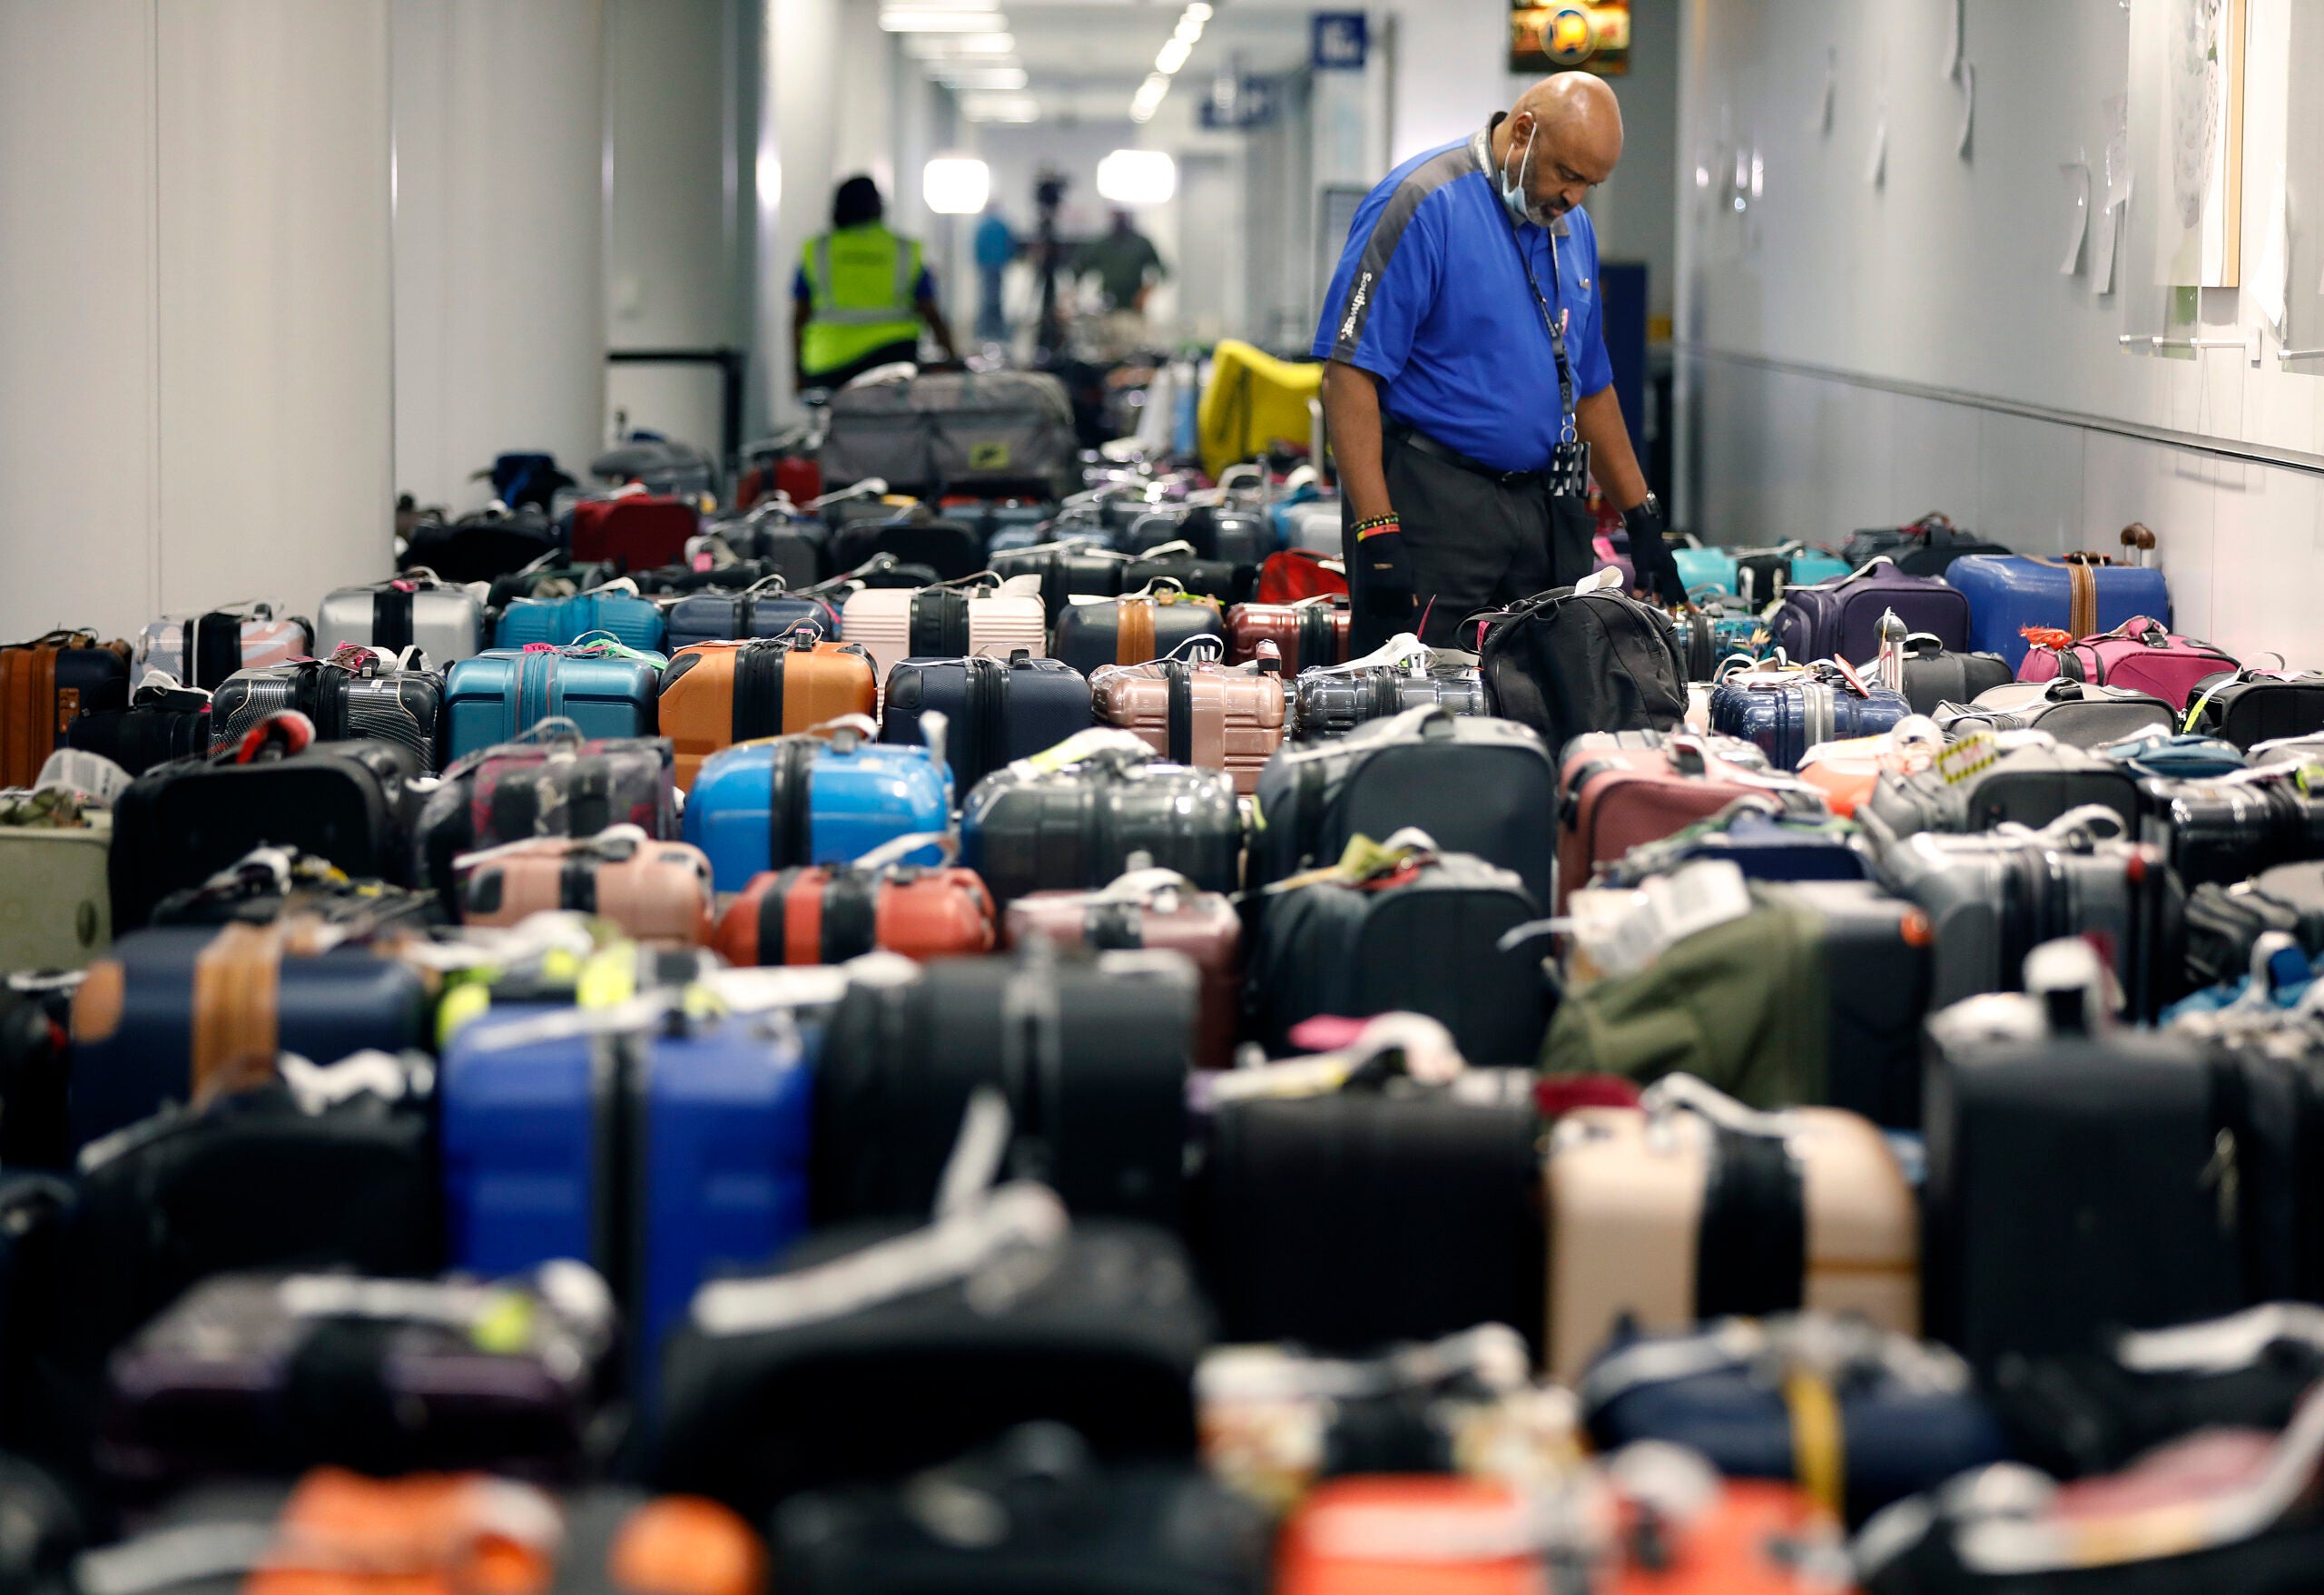 Luggage piles up at an airport